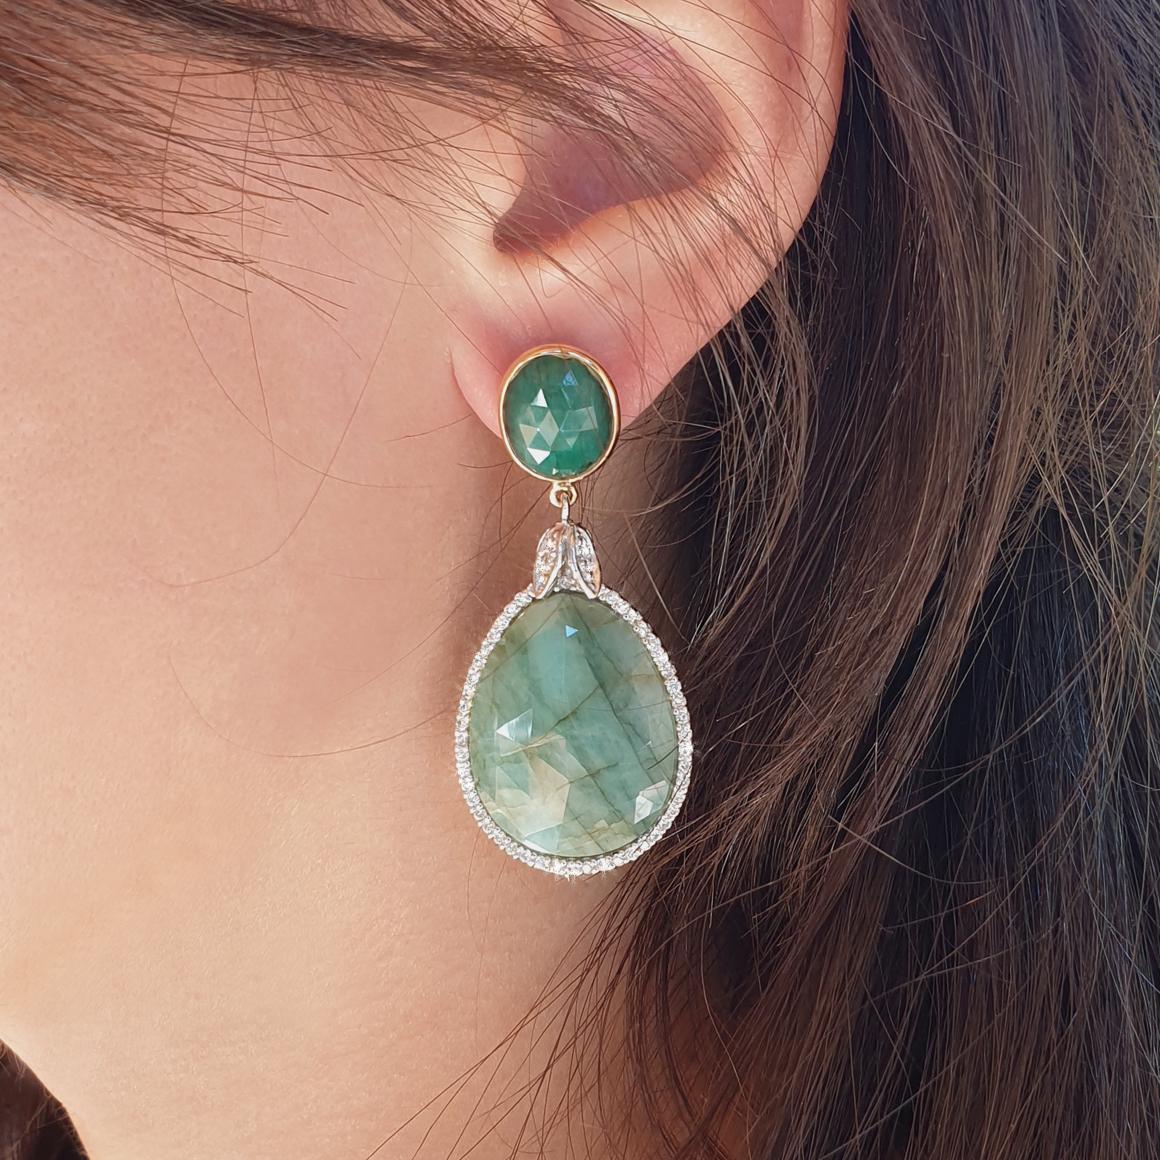 Emeralds are known to be calming and balancing, promoting creativity and eloquence and restoring faith and hope. The are believed to bring good fortune and are used to kindle kindness and sympathy. This Earrings are maked with unique stones of